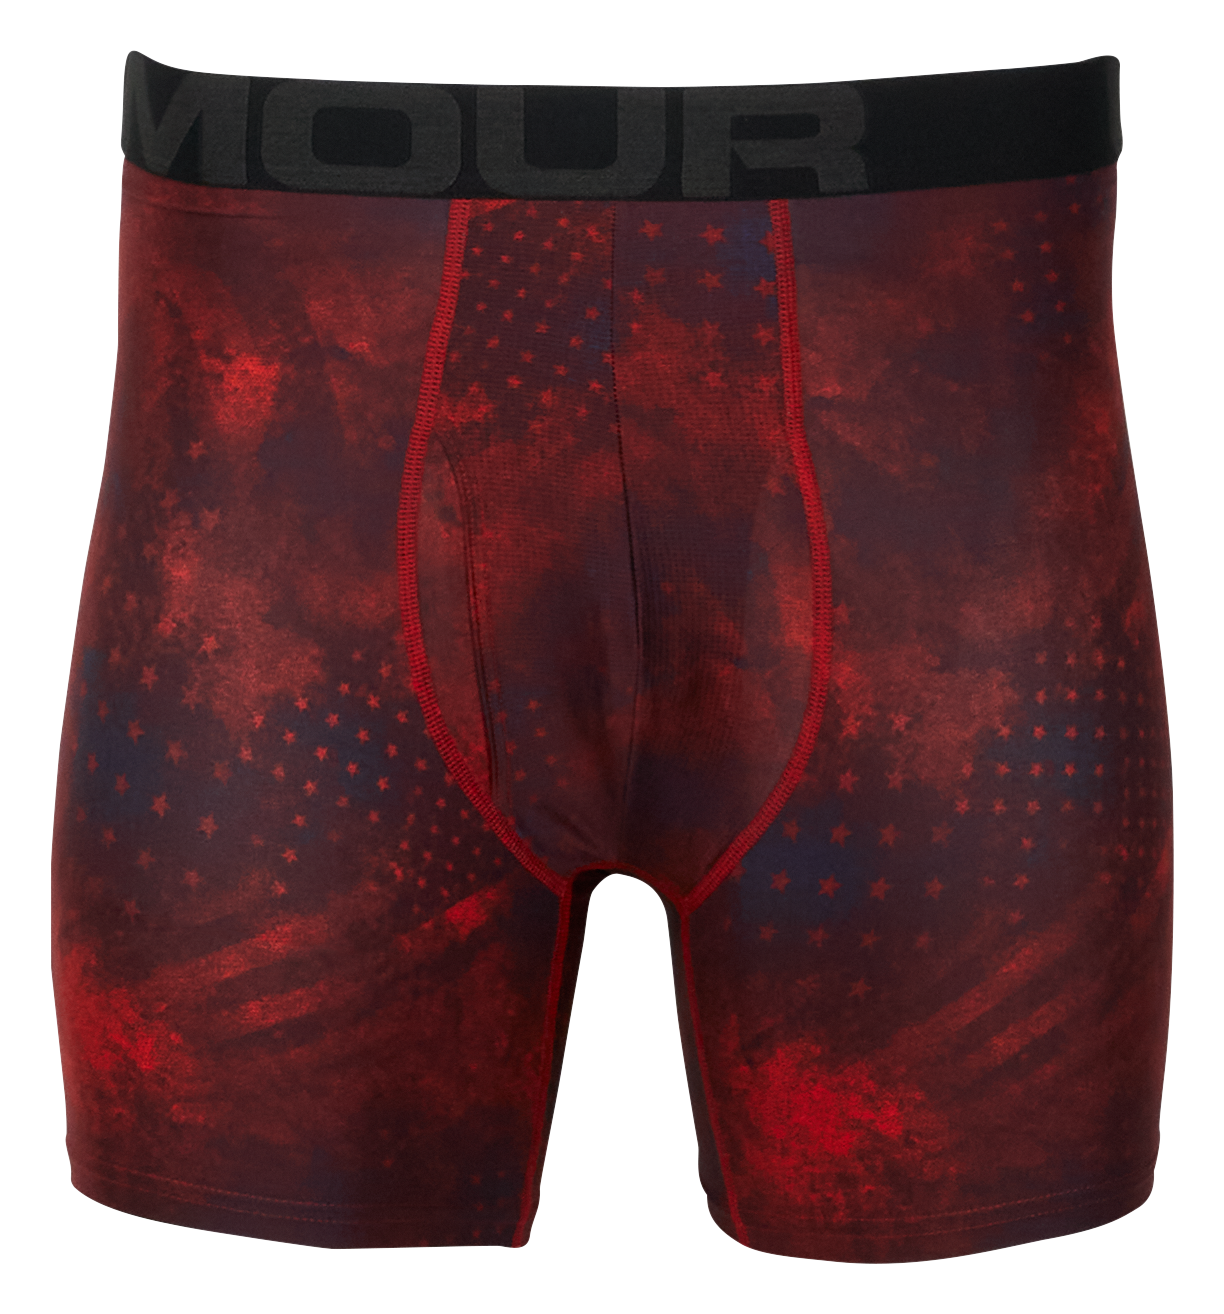 Under Armour Tech 6"" Patterned Boxerjock Shorts for Men - Red/Jet Gray - M